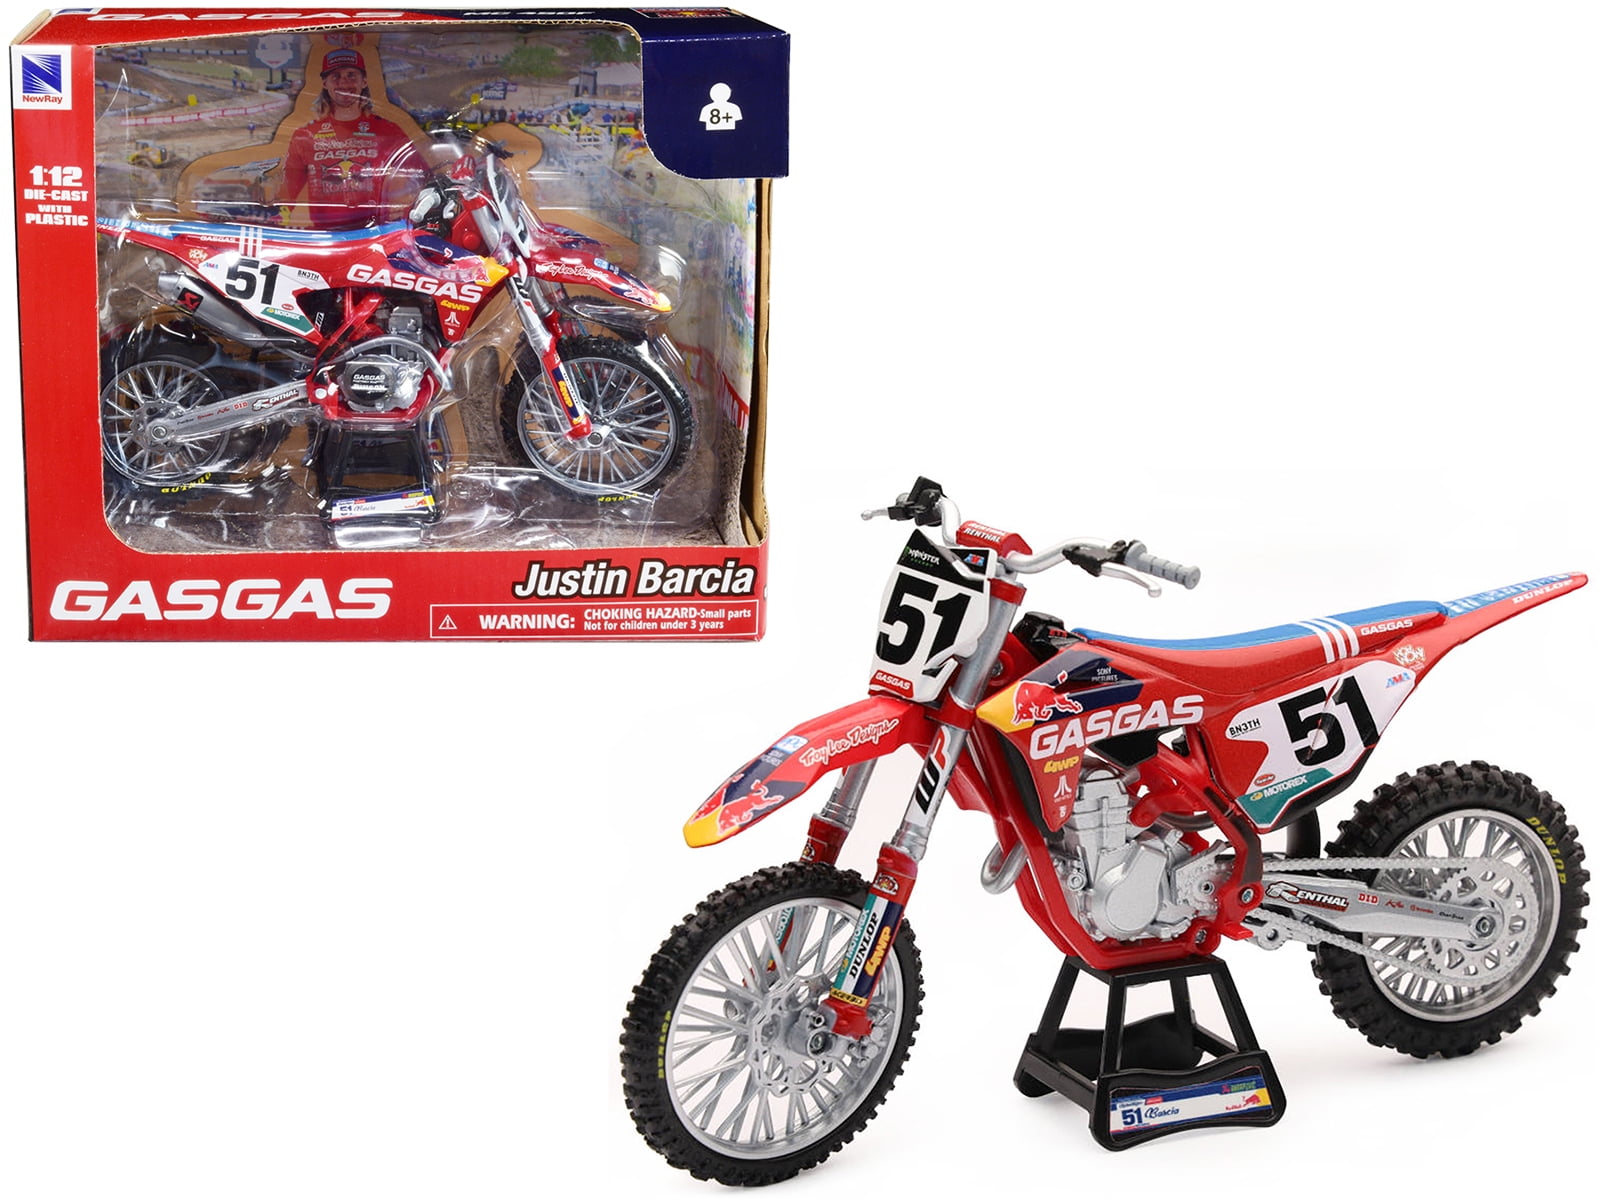 GasGas MC 450F Motorcycle #51 Justin Barcia GasGas Factory Racing - Red  Bull 1/12 Diecast Model by New Ray